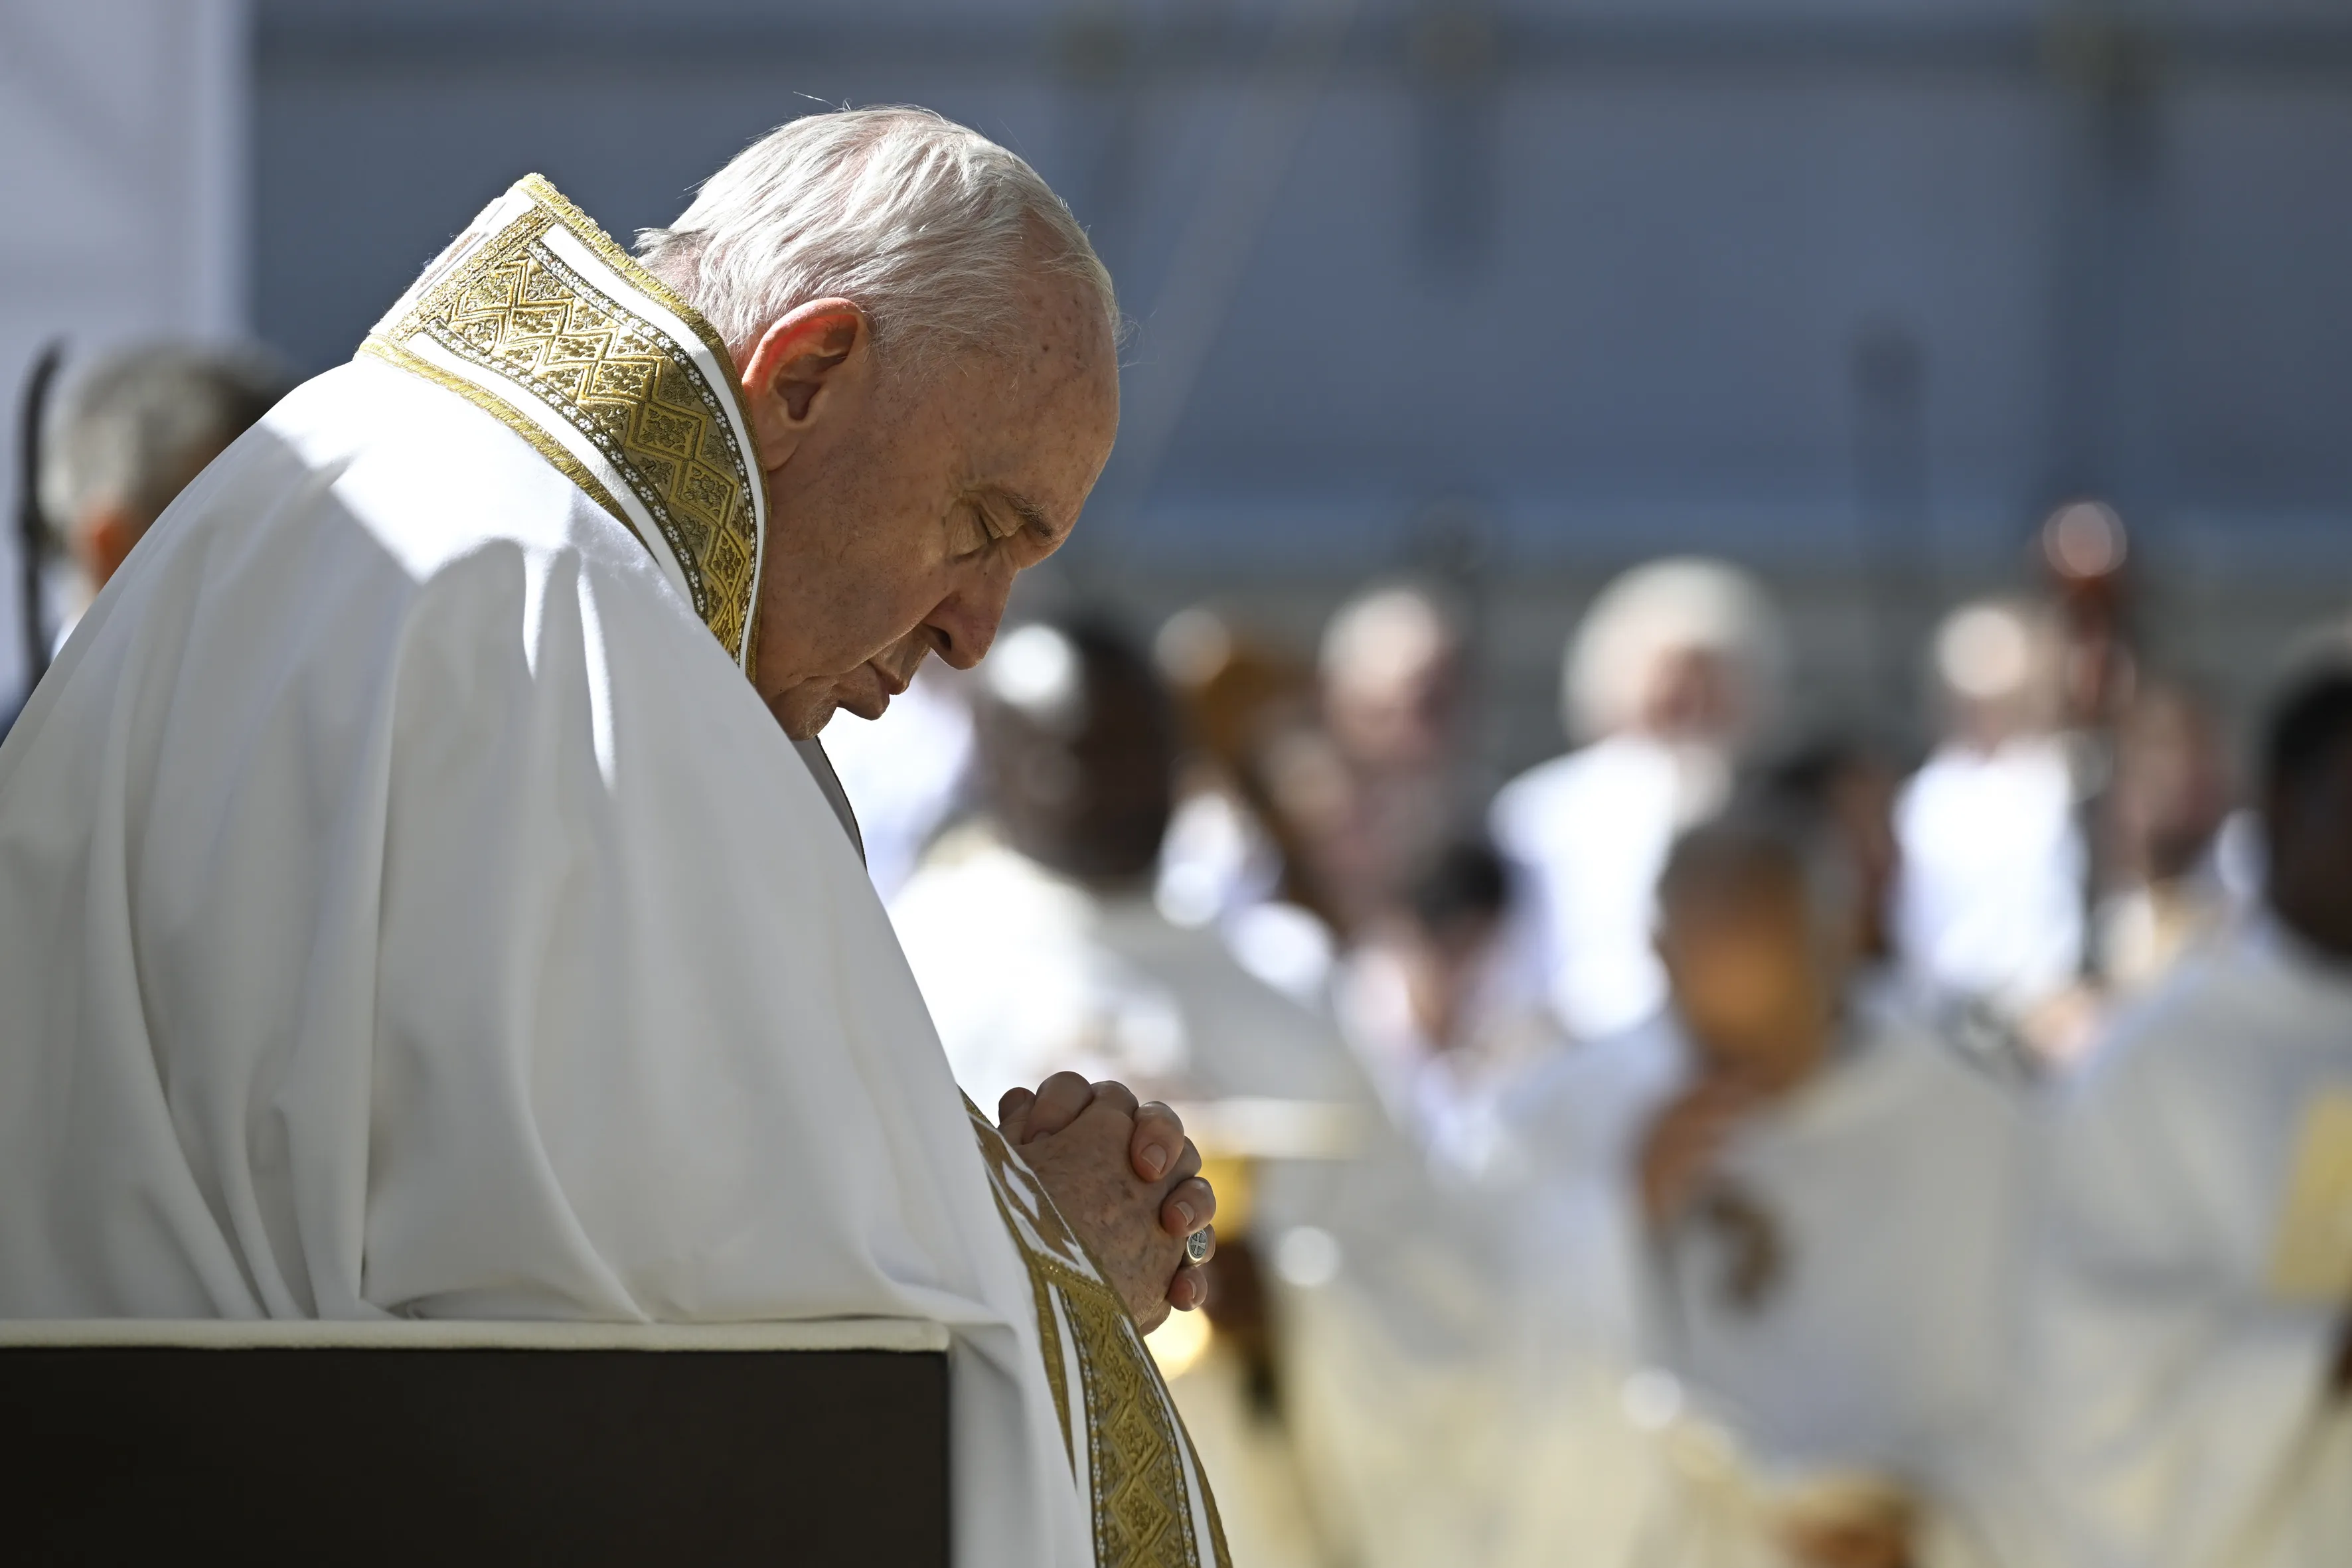 Pope Francis prayed for peace in his Angelus address following Mass in L'Aquila, Italy.?w=200&h=150